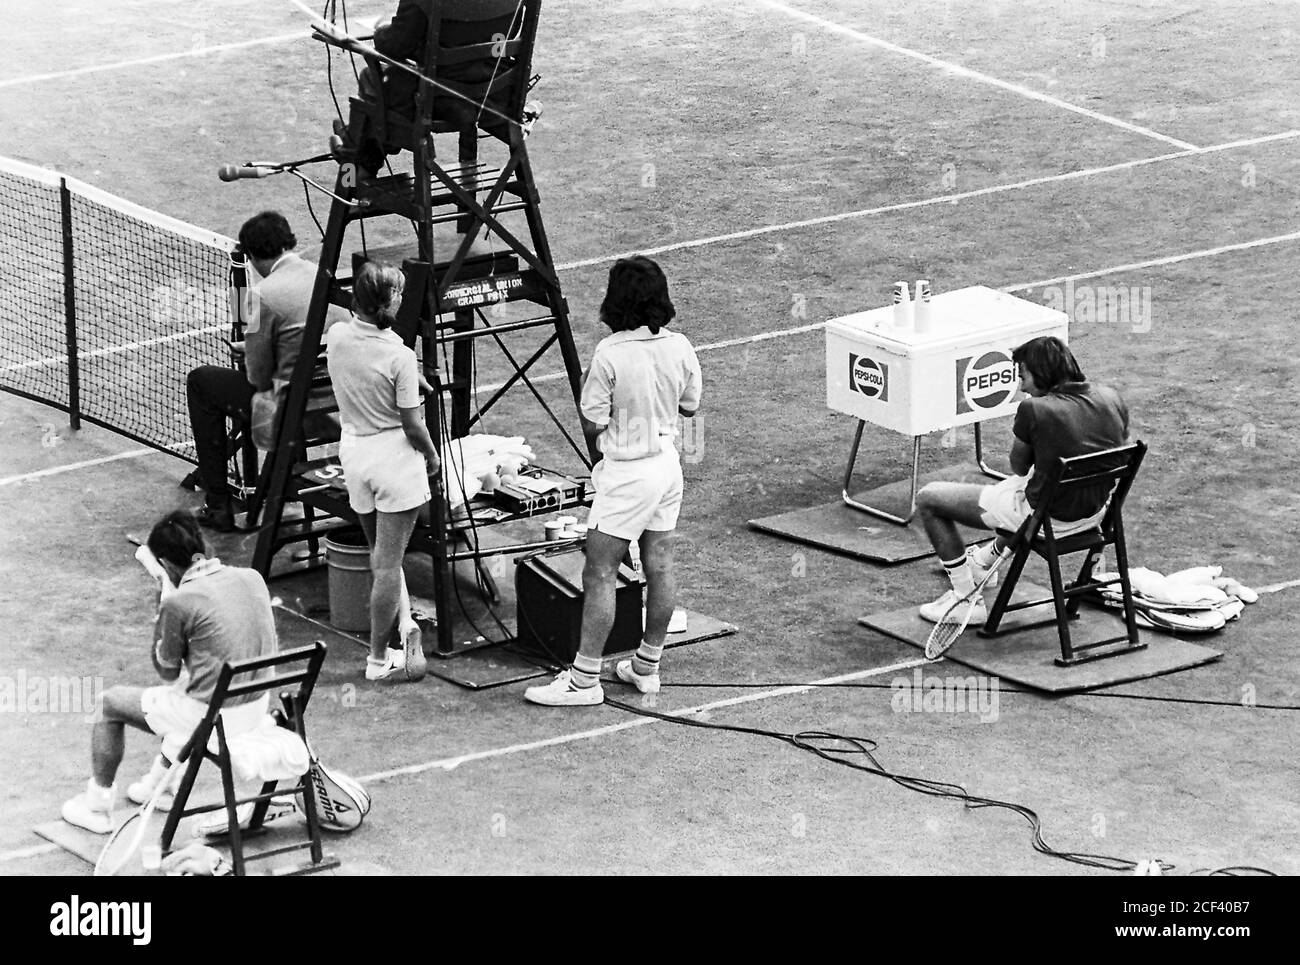 Jimmy Connors (USA) -R- during change over competing against Ken Rosewall (AUS)  in the Men's Final at the 1974 US Open Tennis. Stock Photo